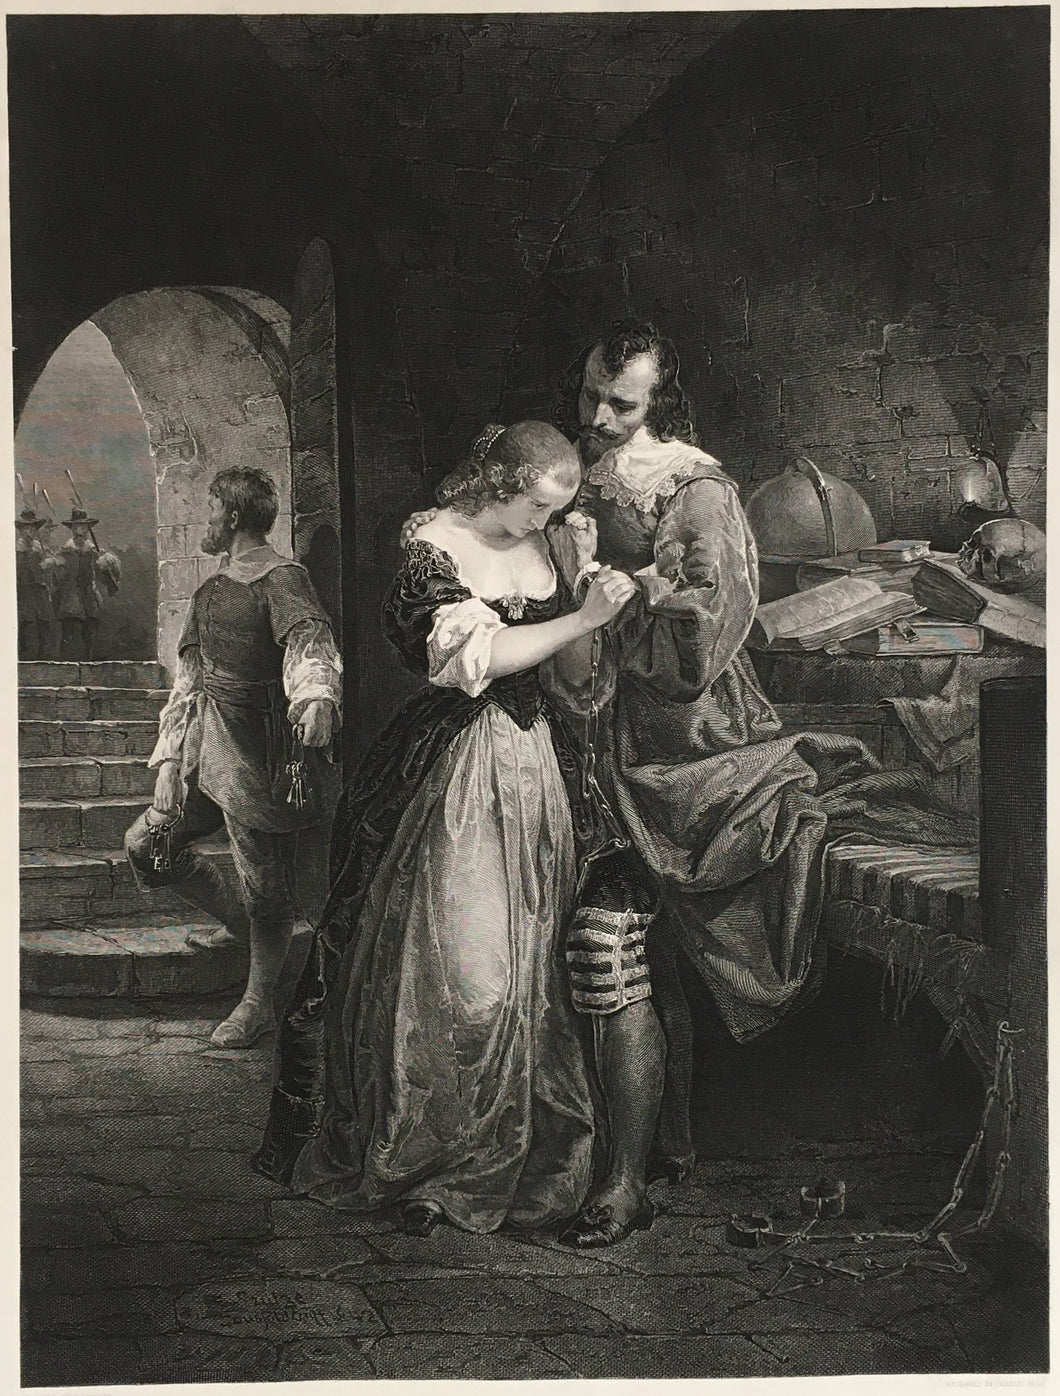 Leutze, Emmanuel “Sir Walter Raleigh Parting with His Wife”